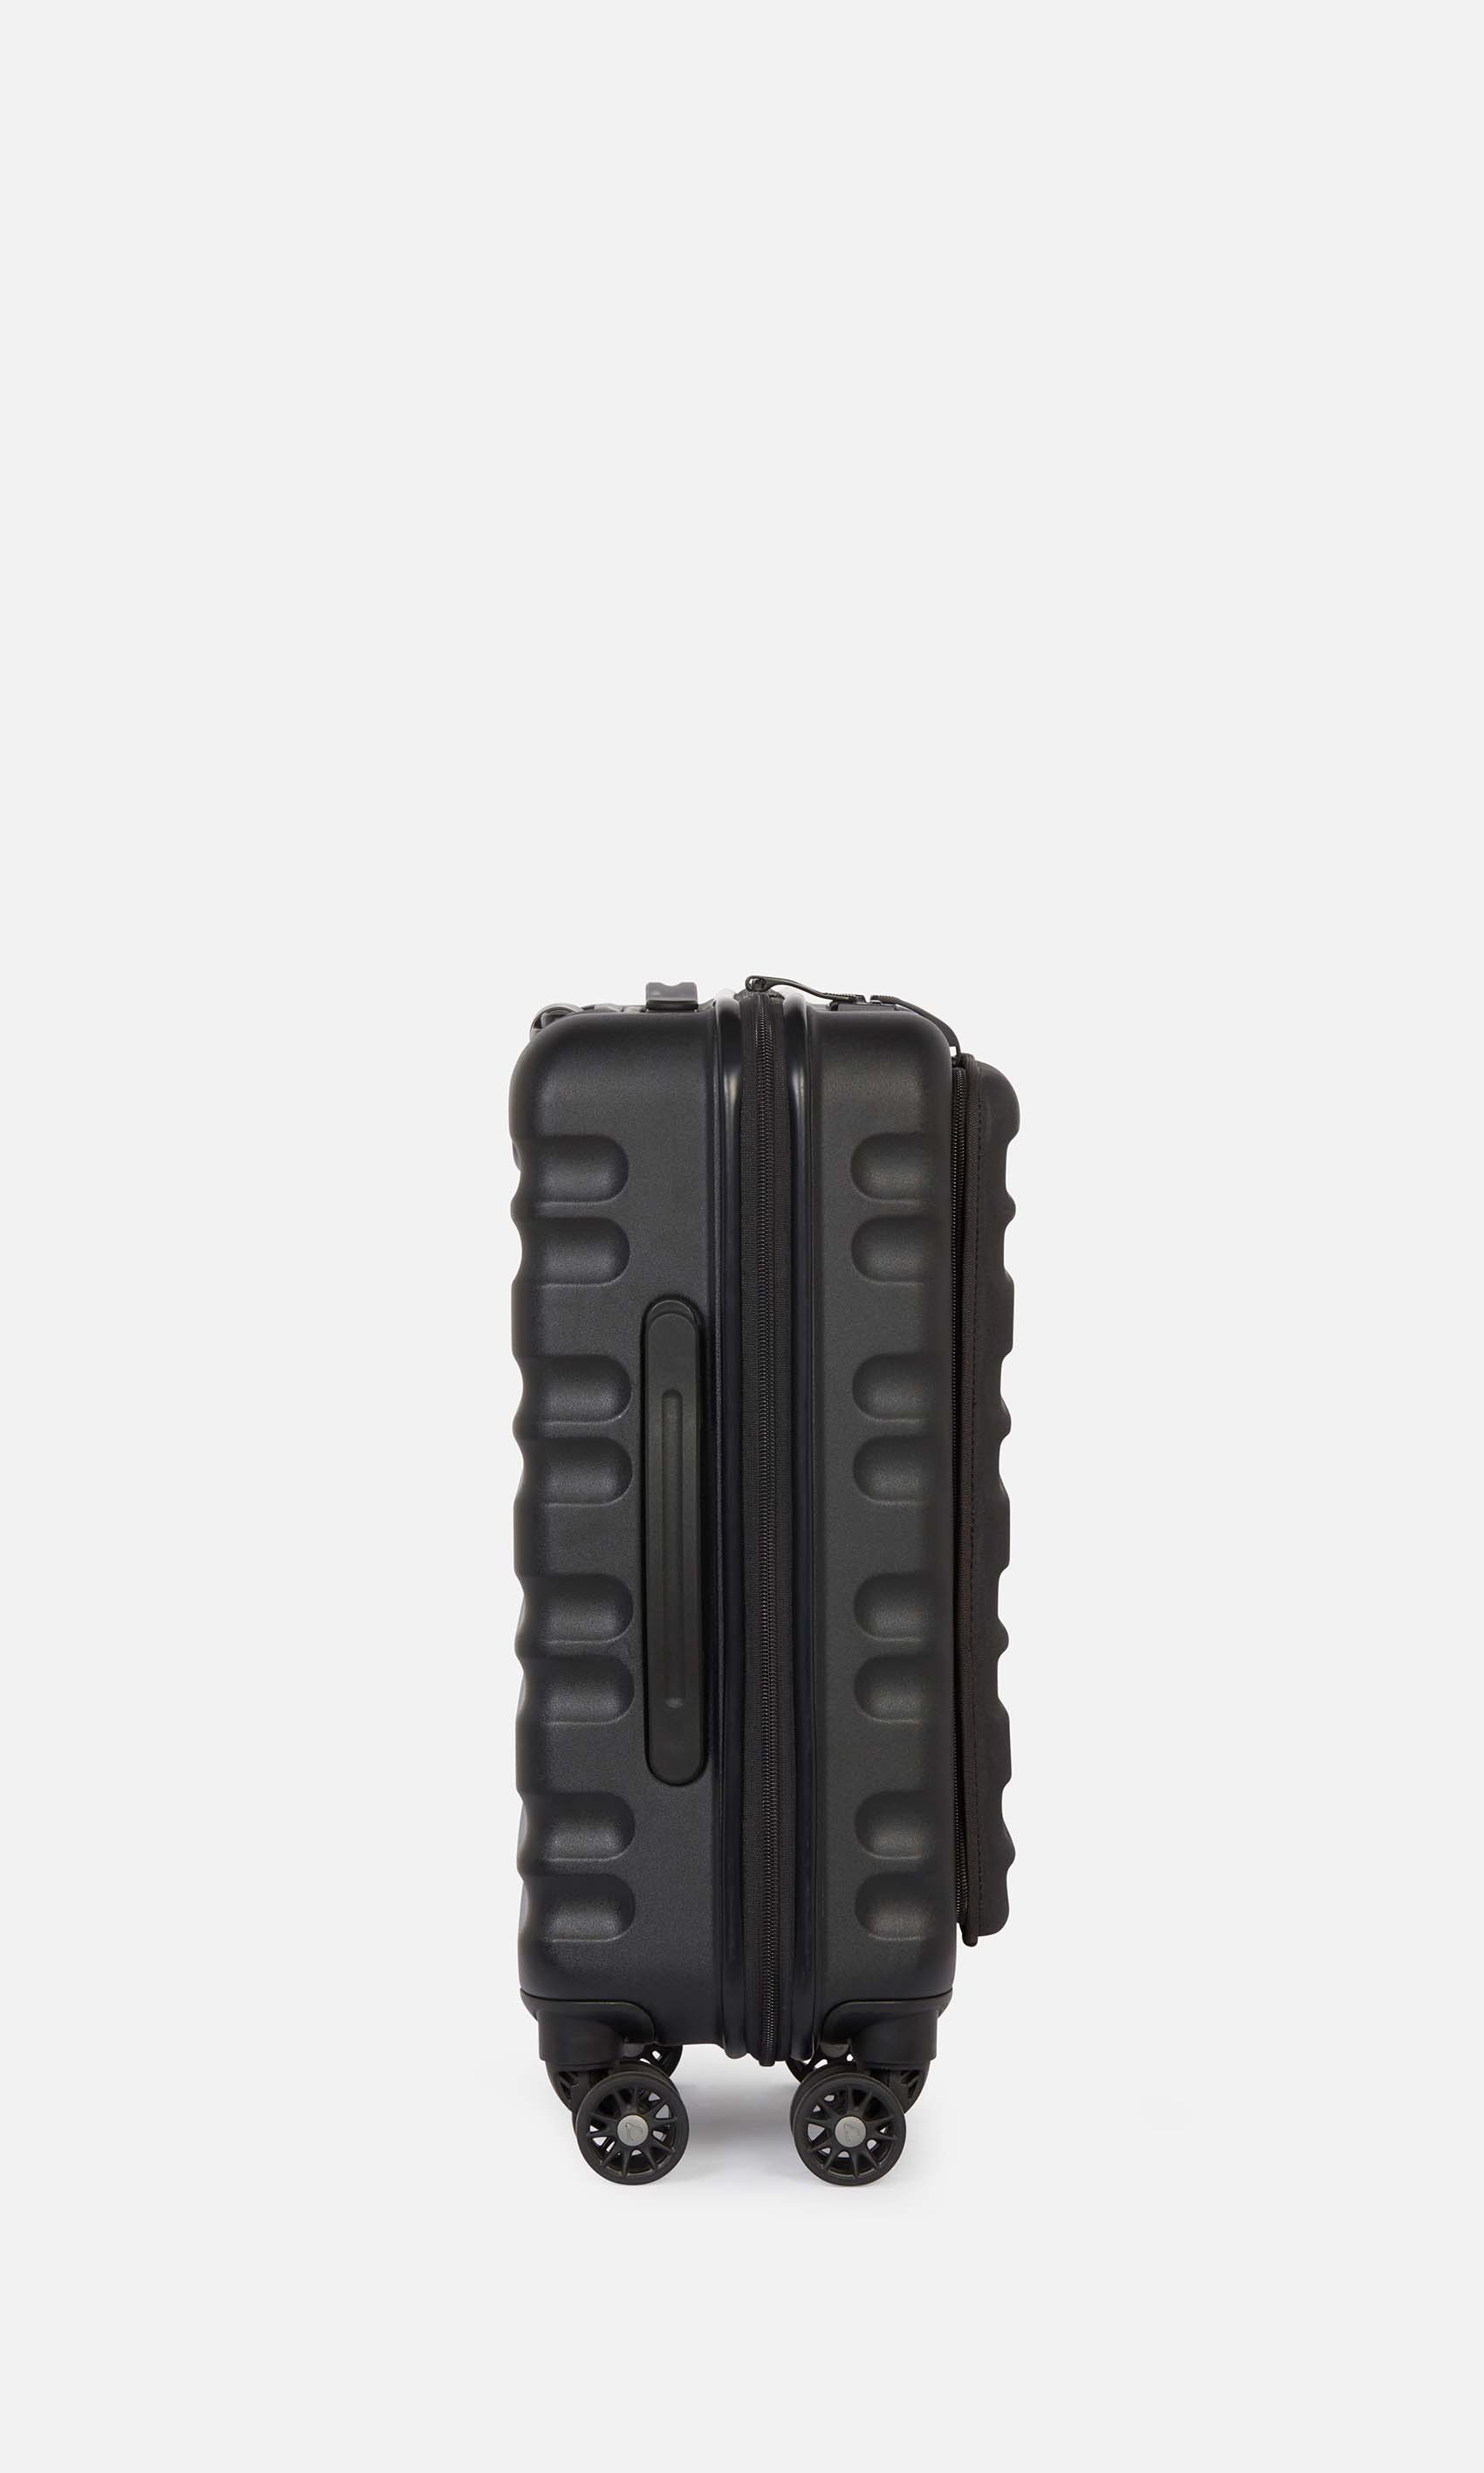 Antler Luggage -  Clifton cabin with pocket in black - Hard Suitcases Clifton Cabin Pocket Suitcase Black | Hard Suitcase | Antler UK